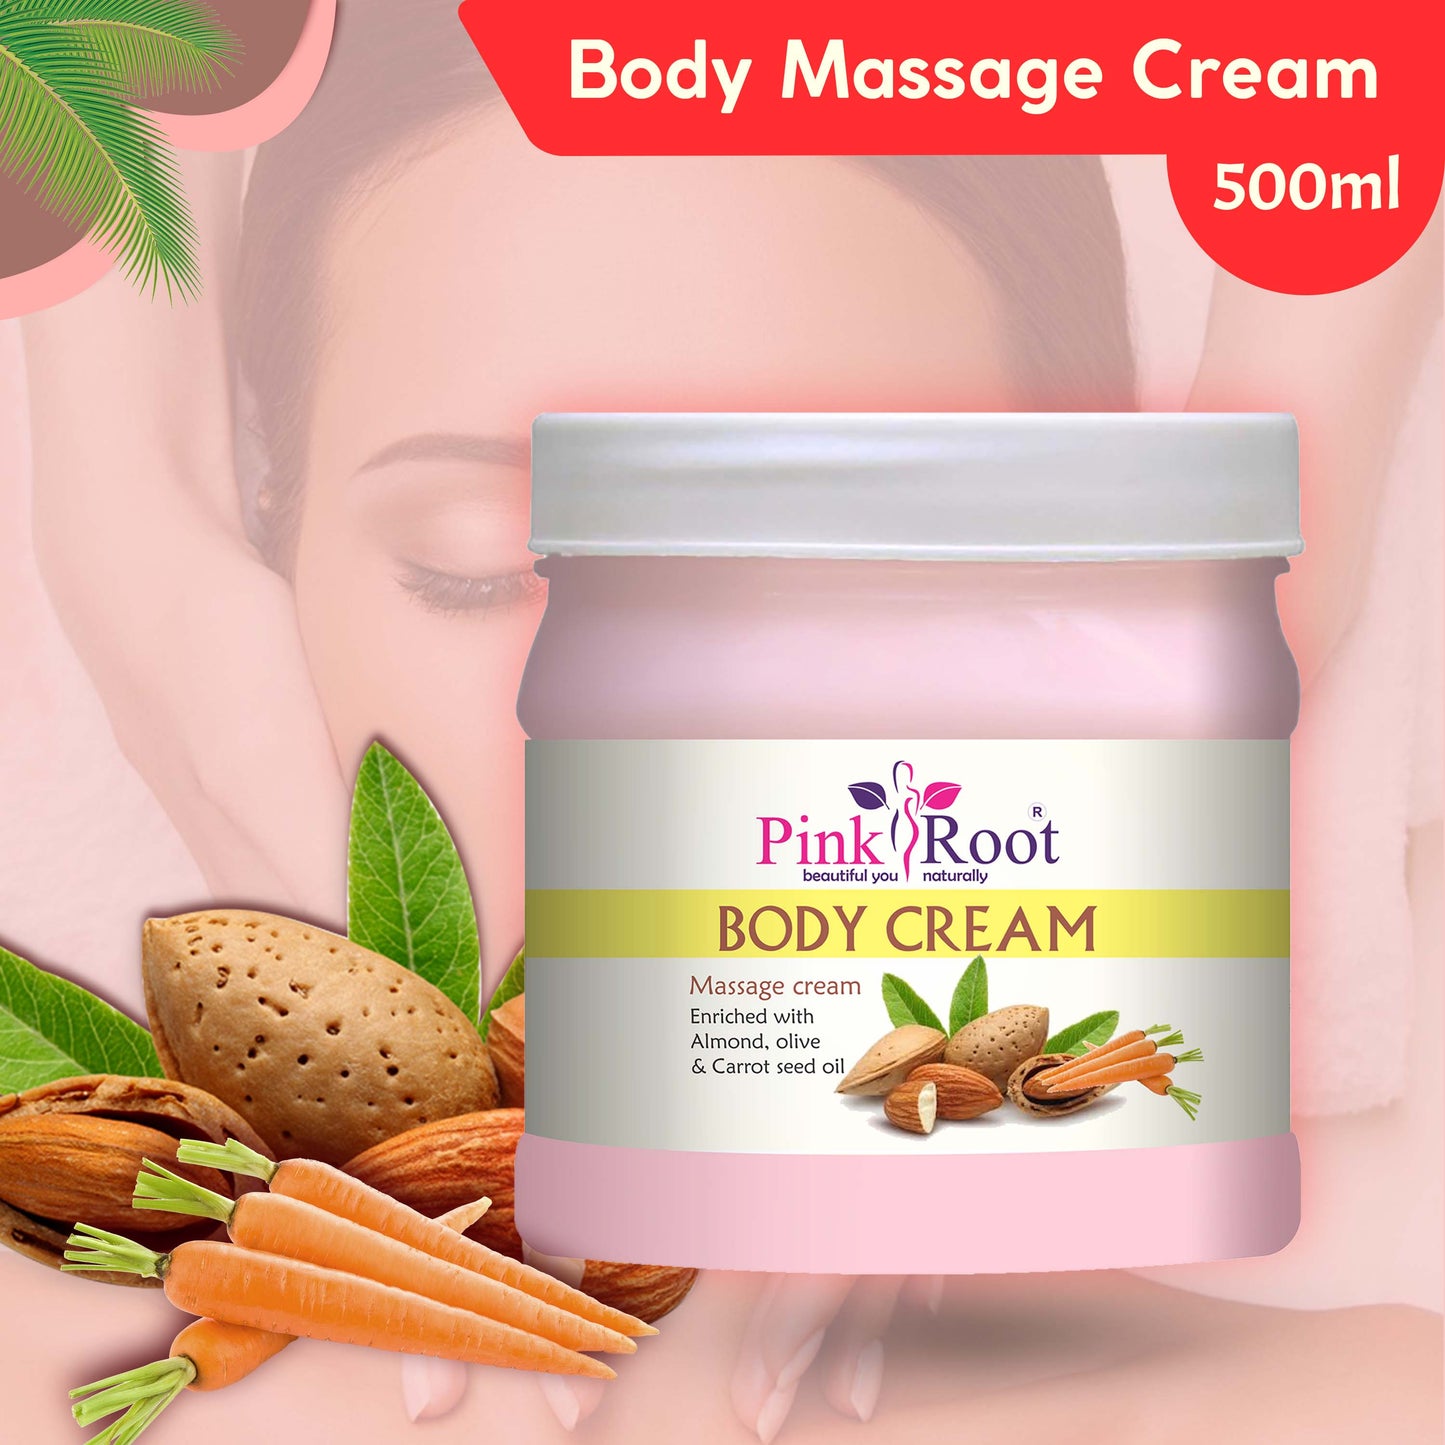 Pink Root Body Massage Cream Enriched with Almond Oil, olive Oil & Carrot Seed Oil (500ml) helps in Body Moisturising & Nourishment